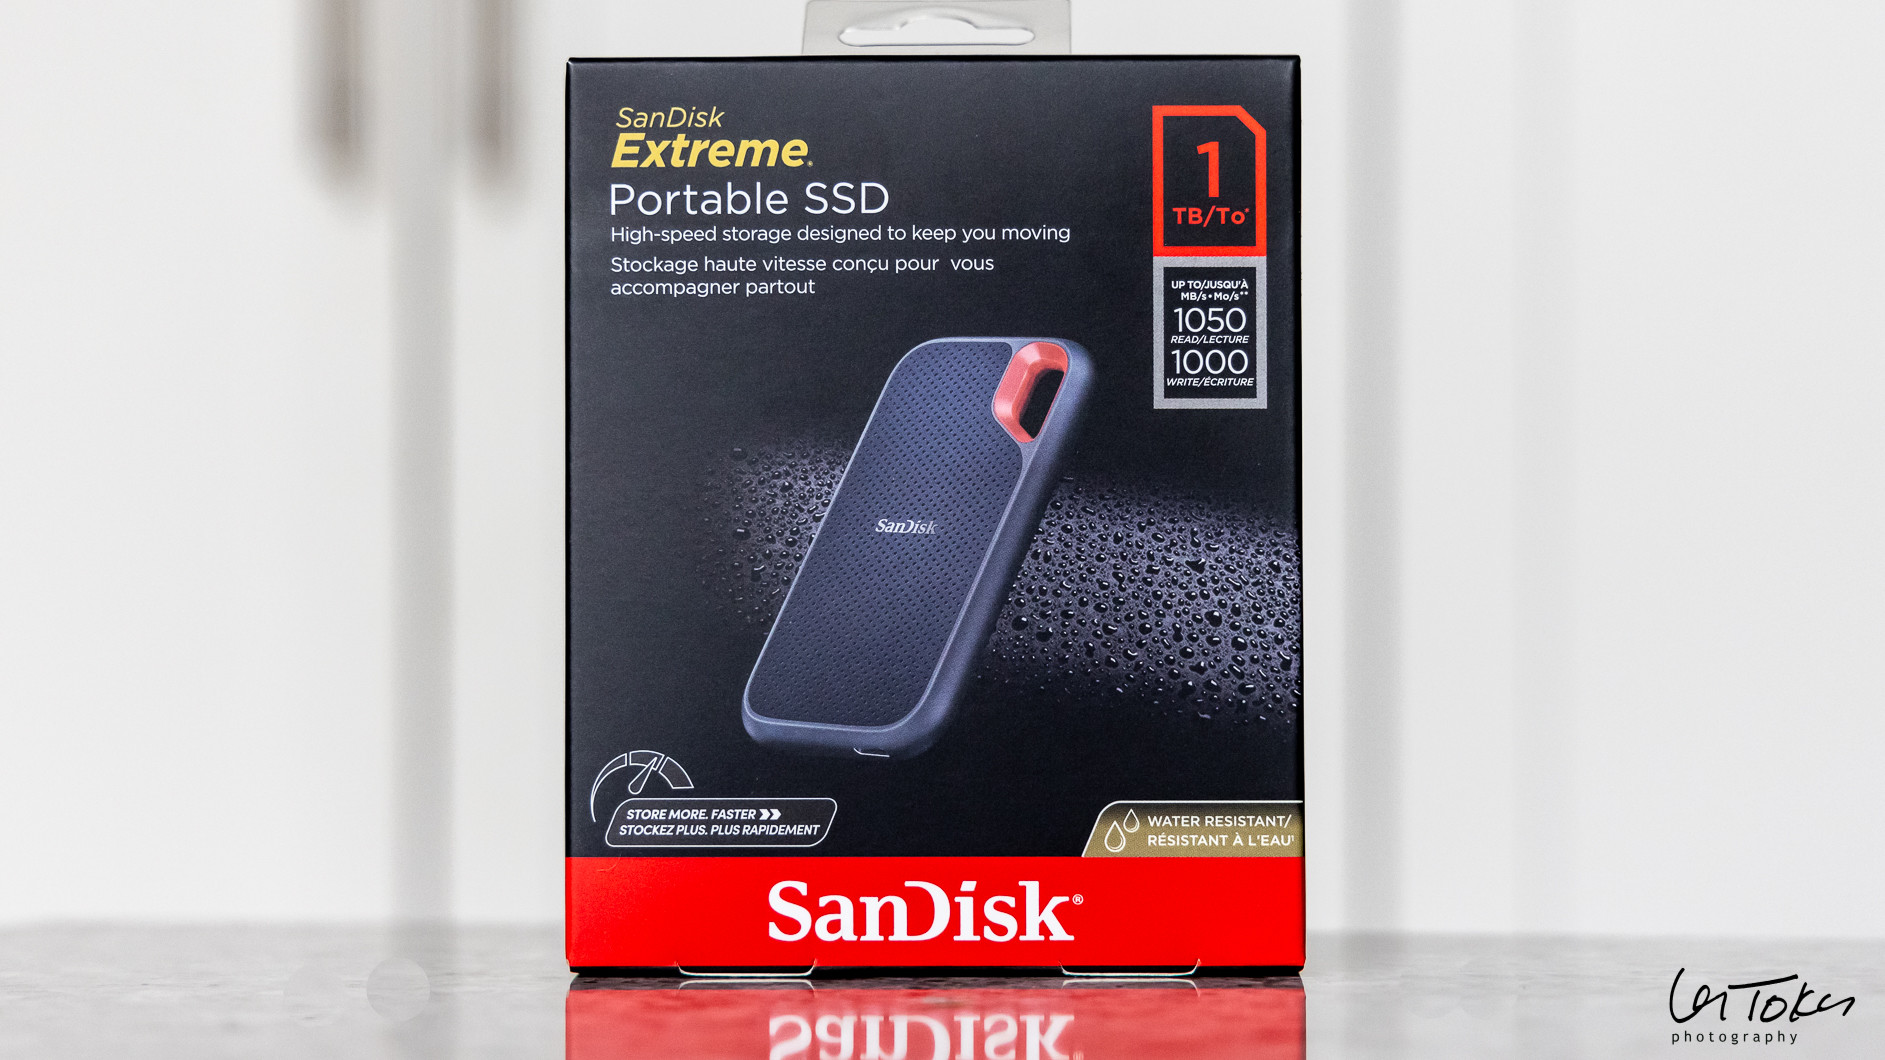 SanDisk Extreme Portable SSD 1TB Review | The SSD Review